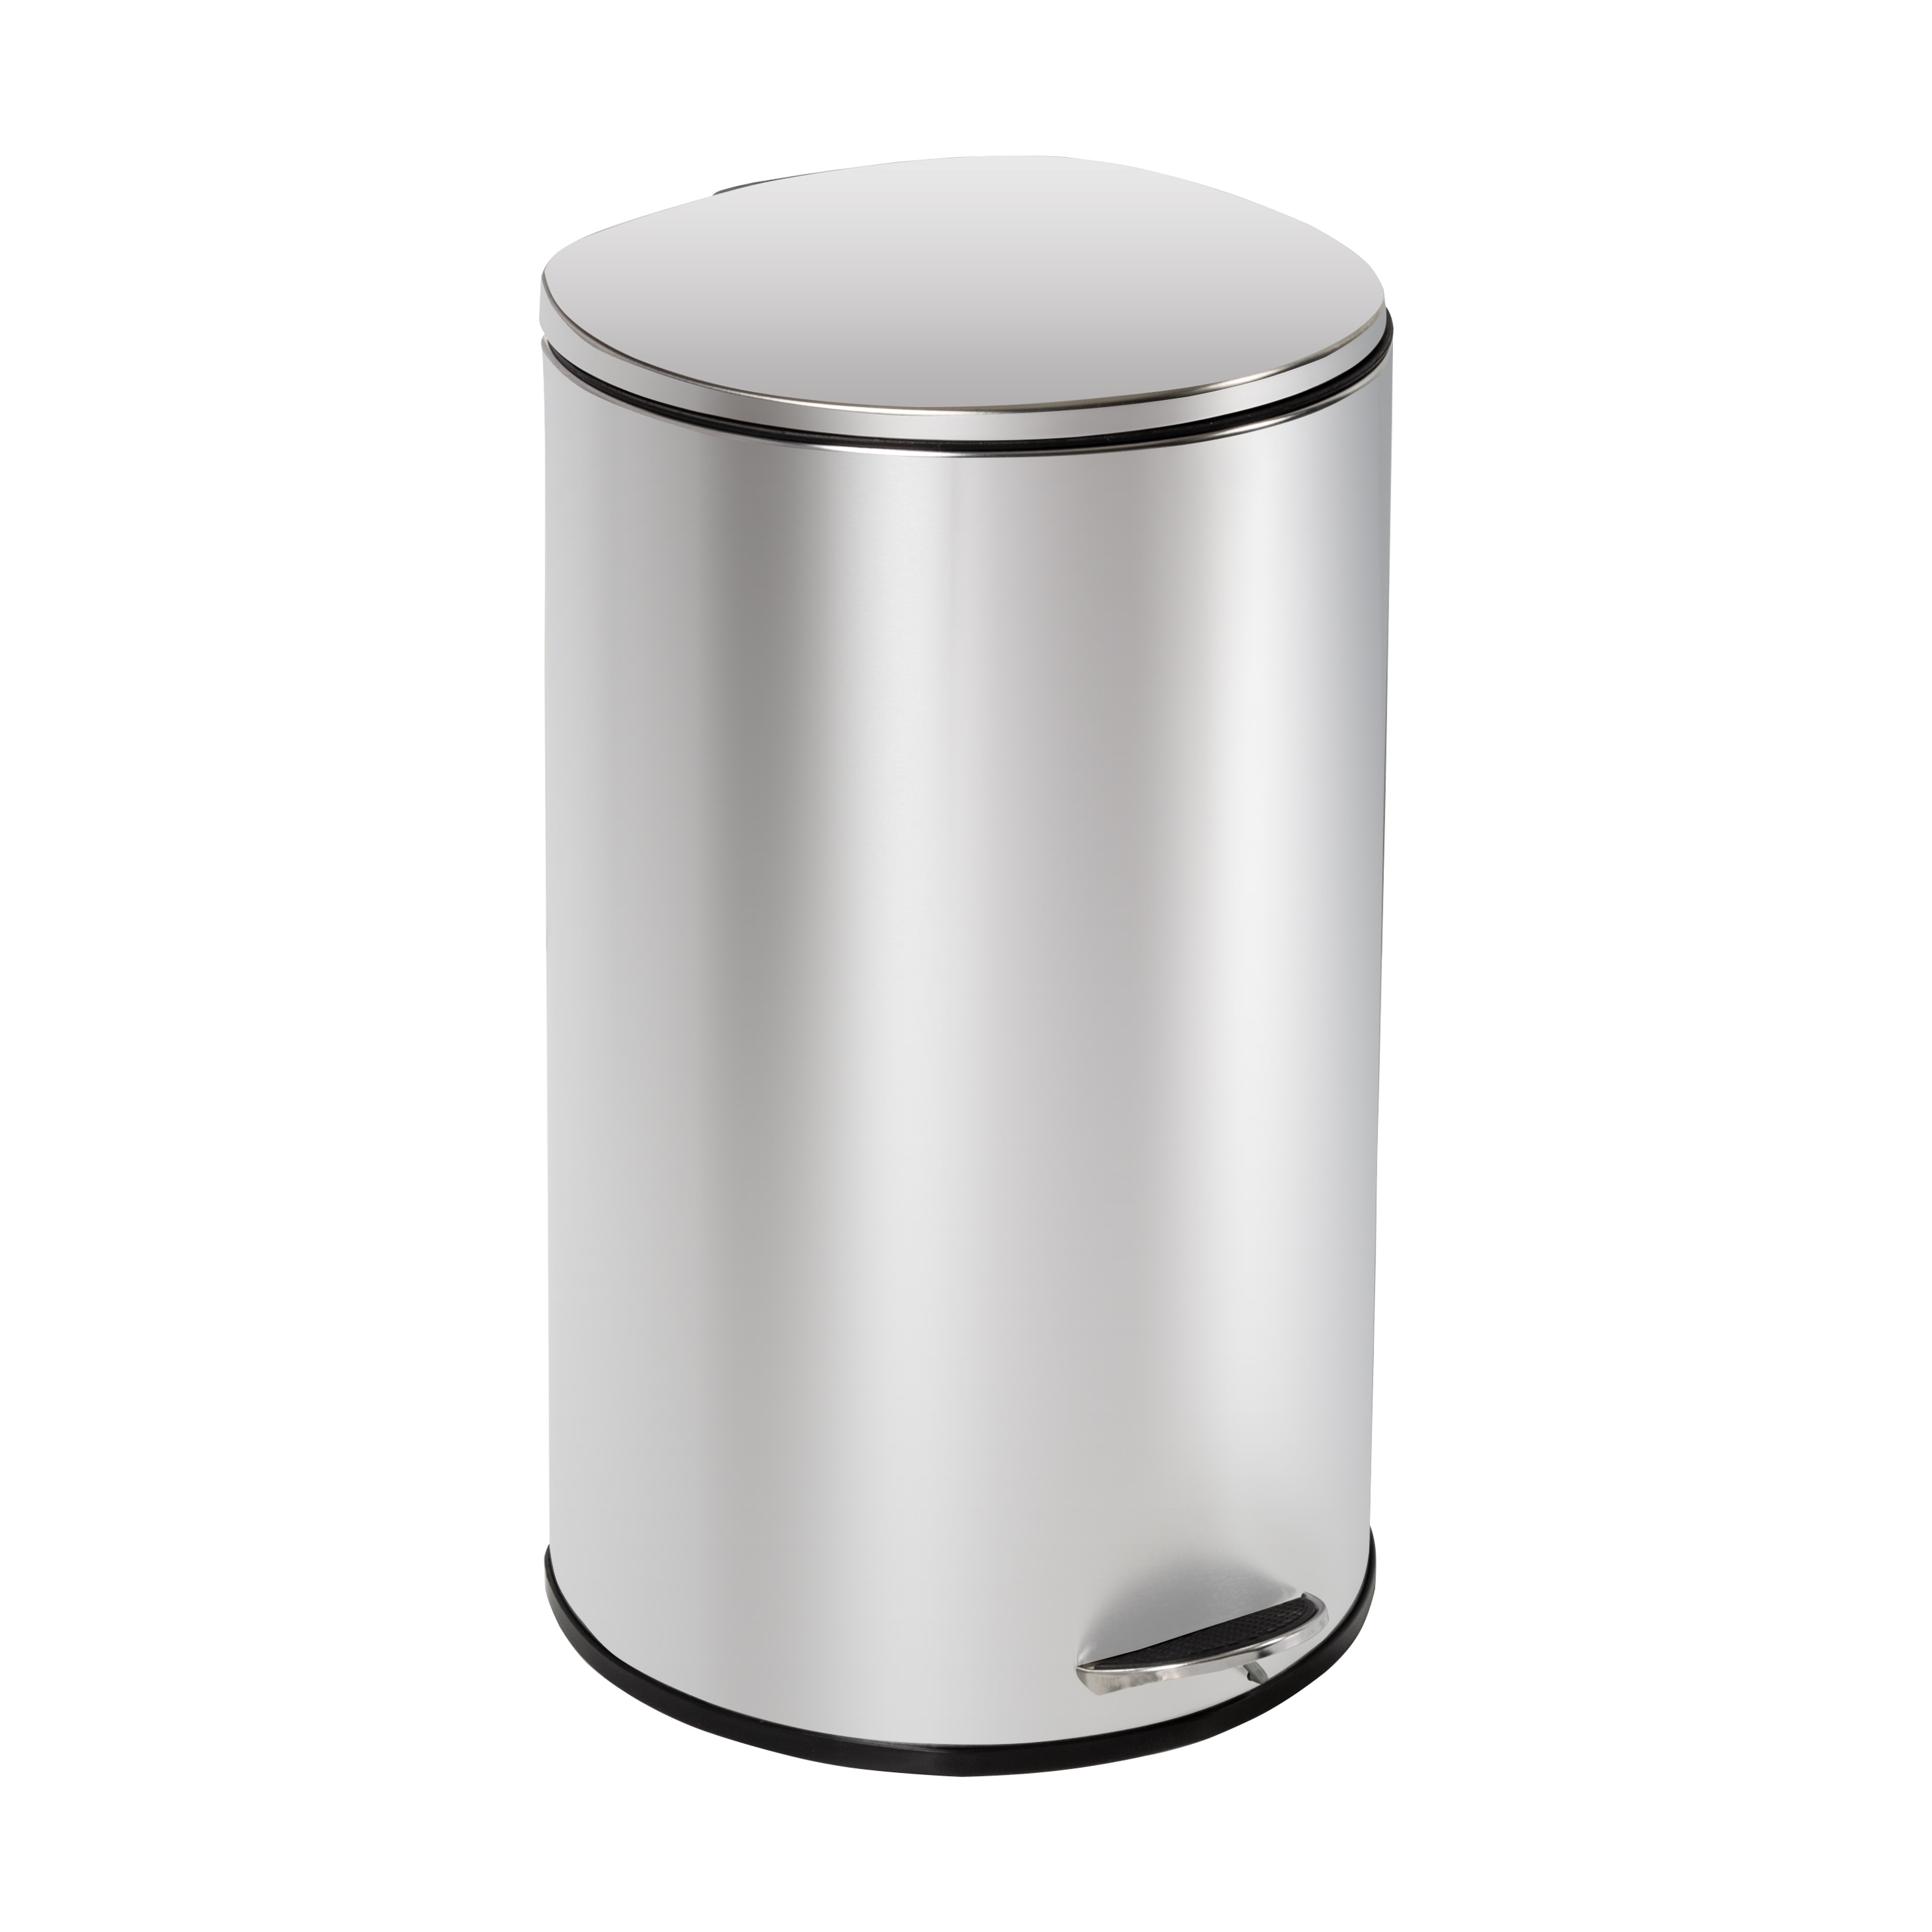 https://ak1.ostkcdn.com/images/products/is/images/direct/10baf6c09ae5df1a62108f83db8b4e264a35f312/Semi-Round-Stainless-Steel-Step-Trash-Can-with-Lid%2C-40-Liter.jpg